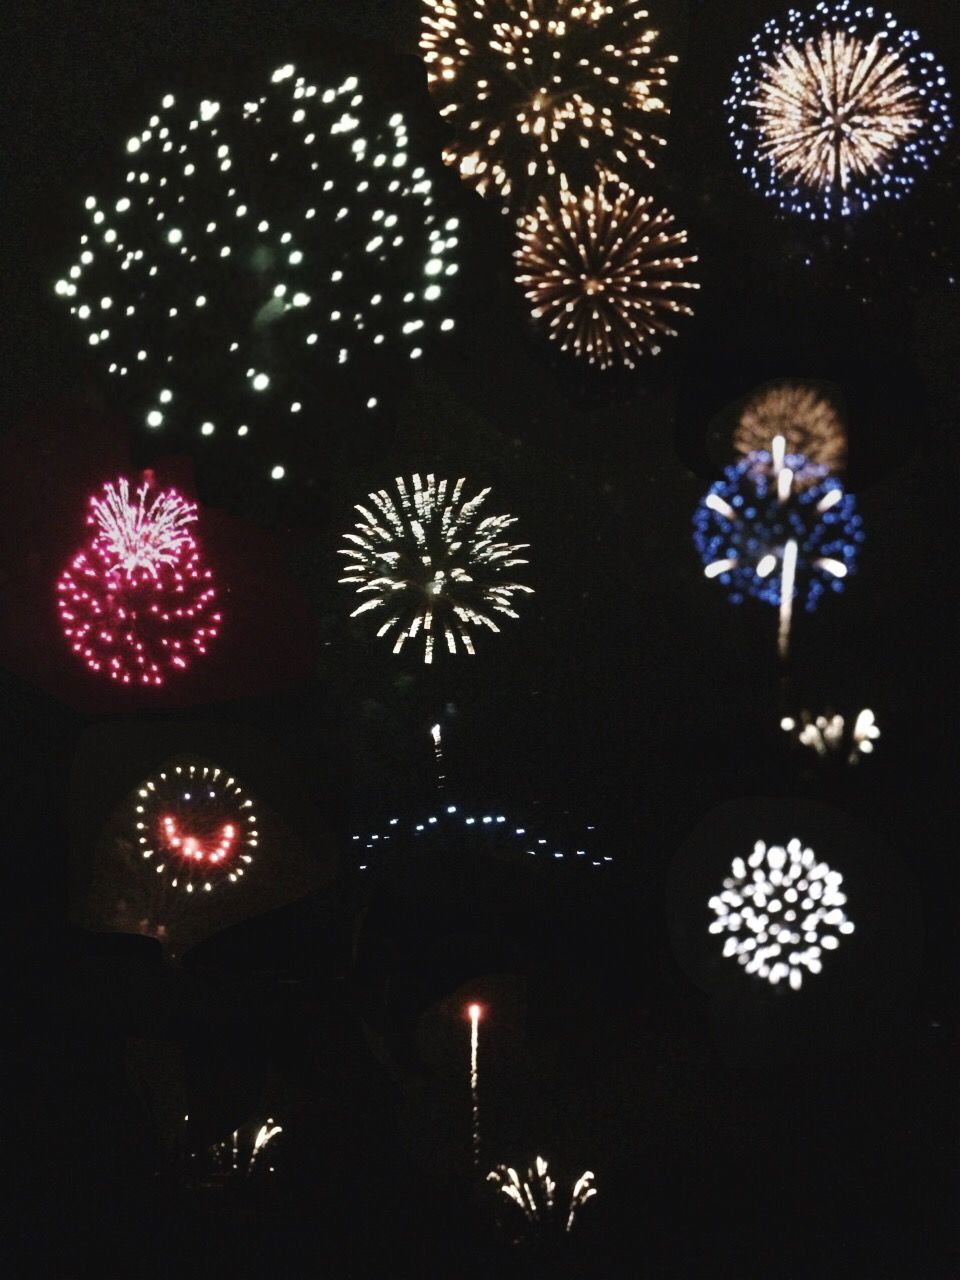 LOW ANGLE VIEW OF ILLUMINATED FIREWORK DISPLAY AT NIGHT